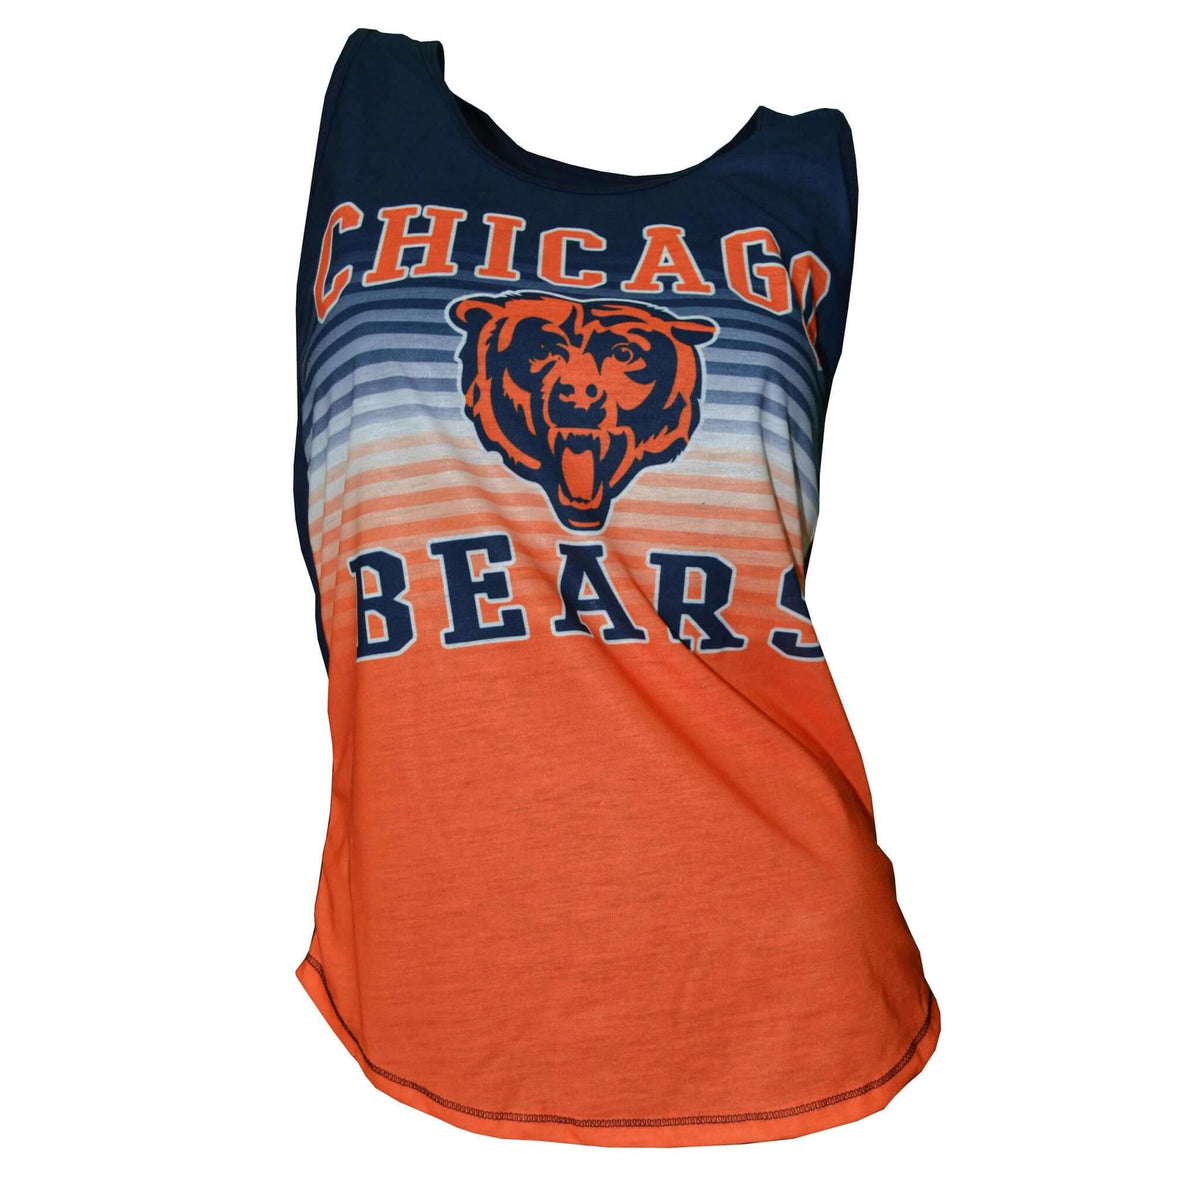 College Concepts Women's Chicago Bears Mainstream Hooded Top